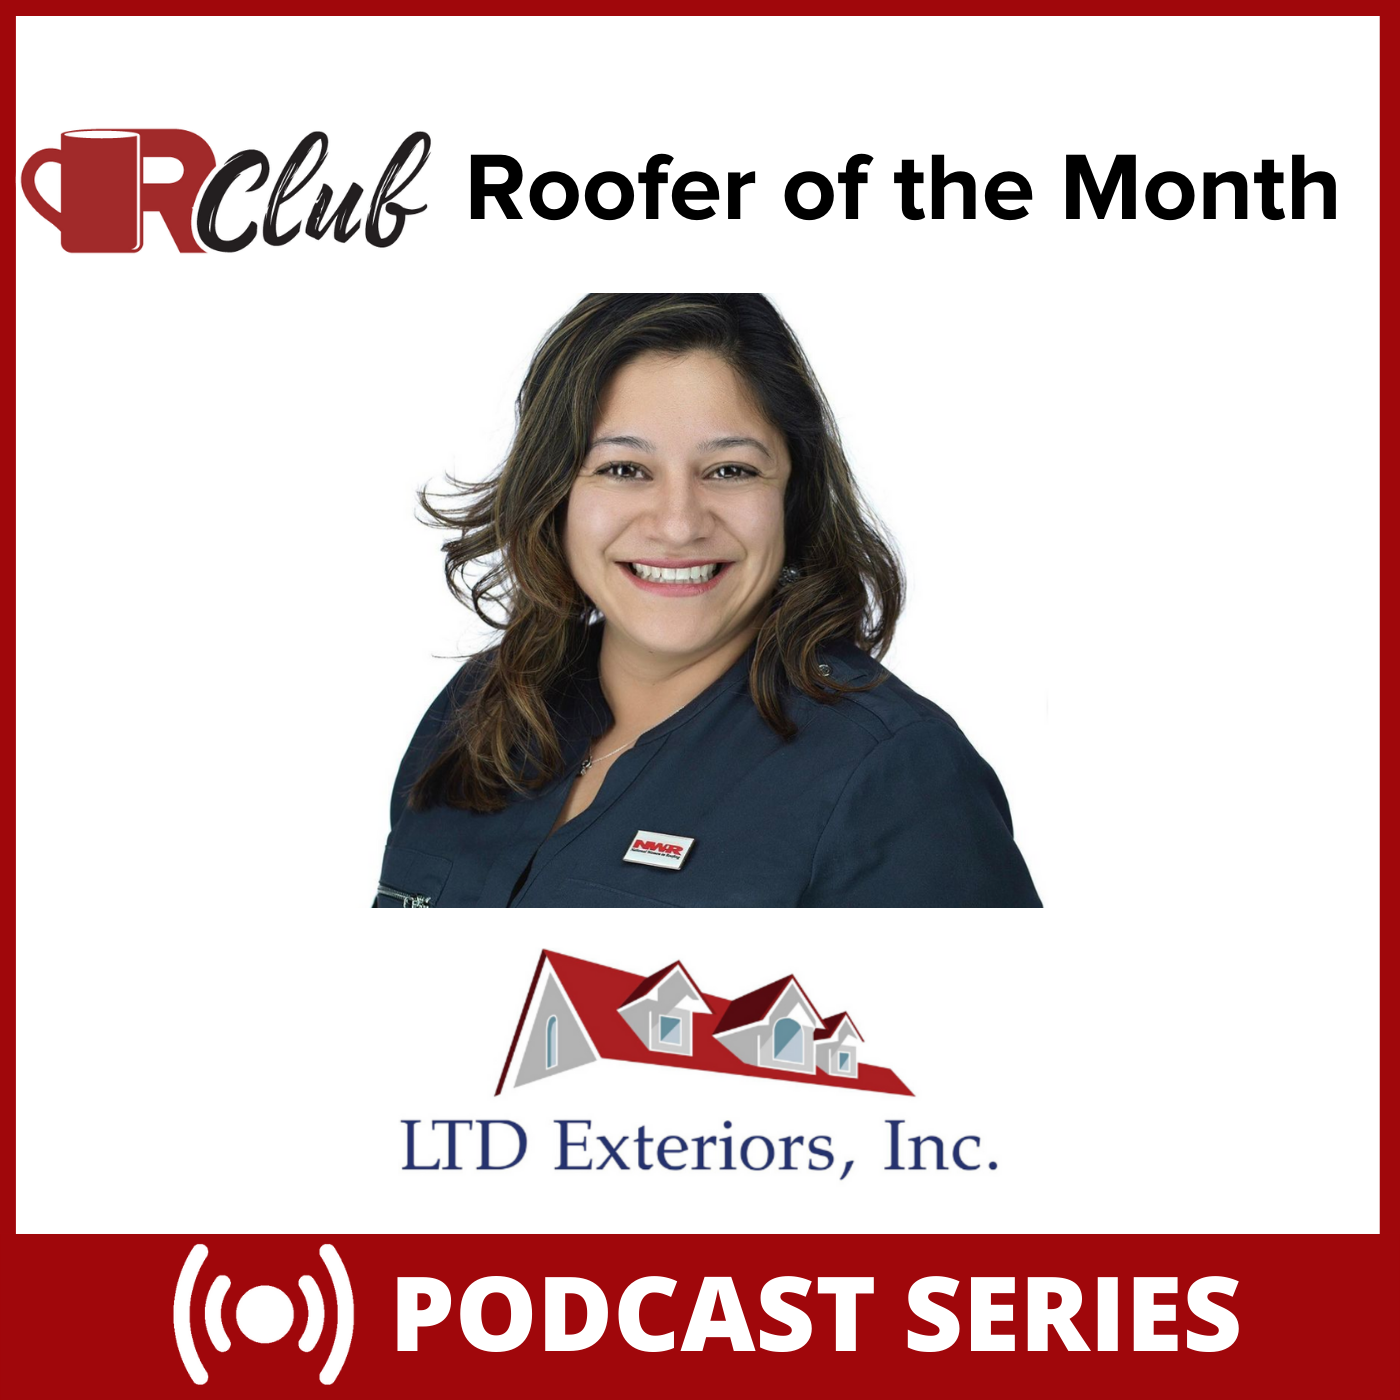 March Roofer of the Month - Michelle Kettering, LTD Exteriors